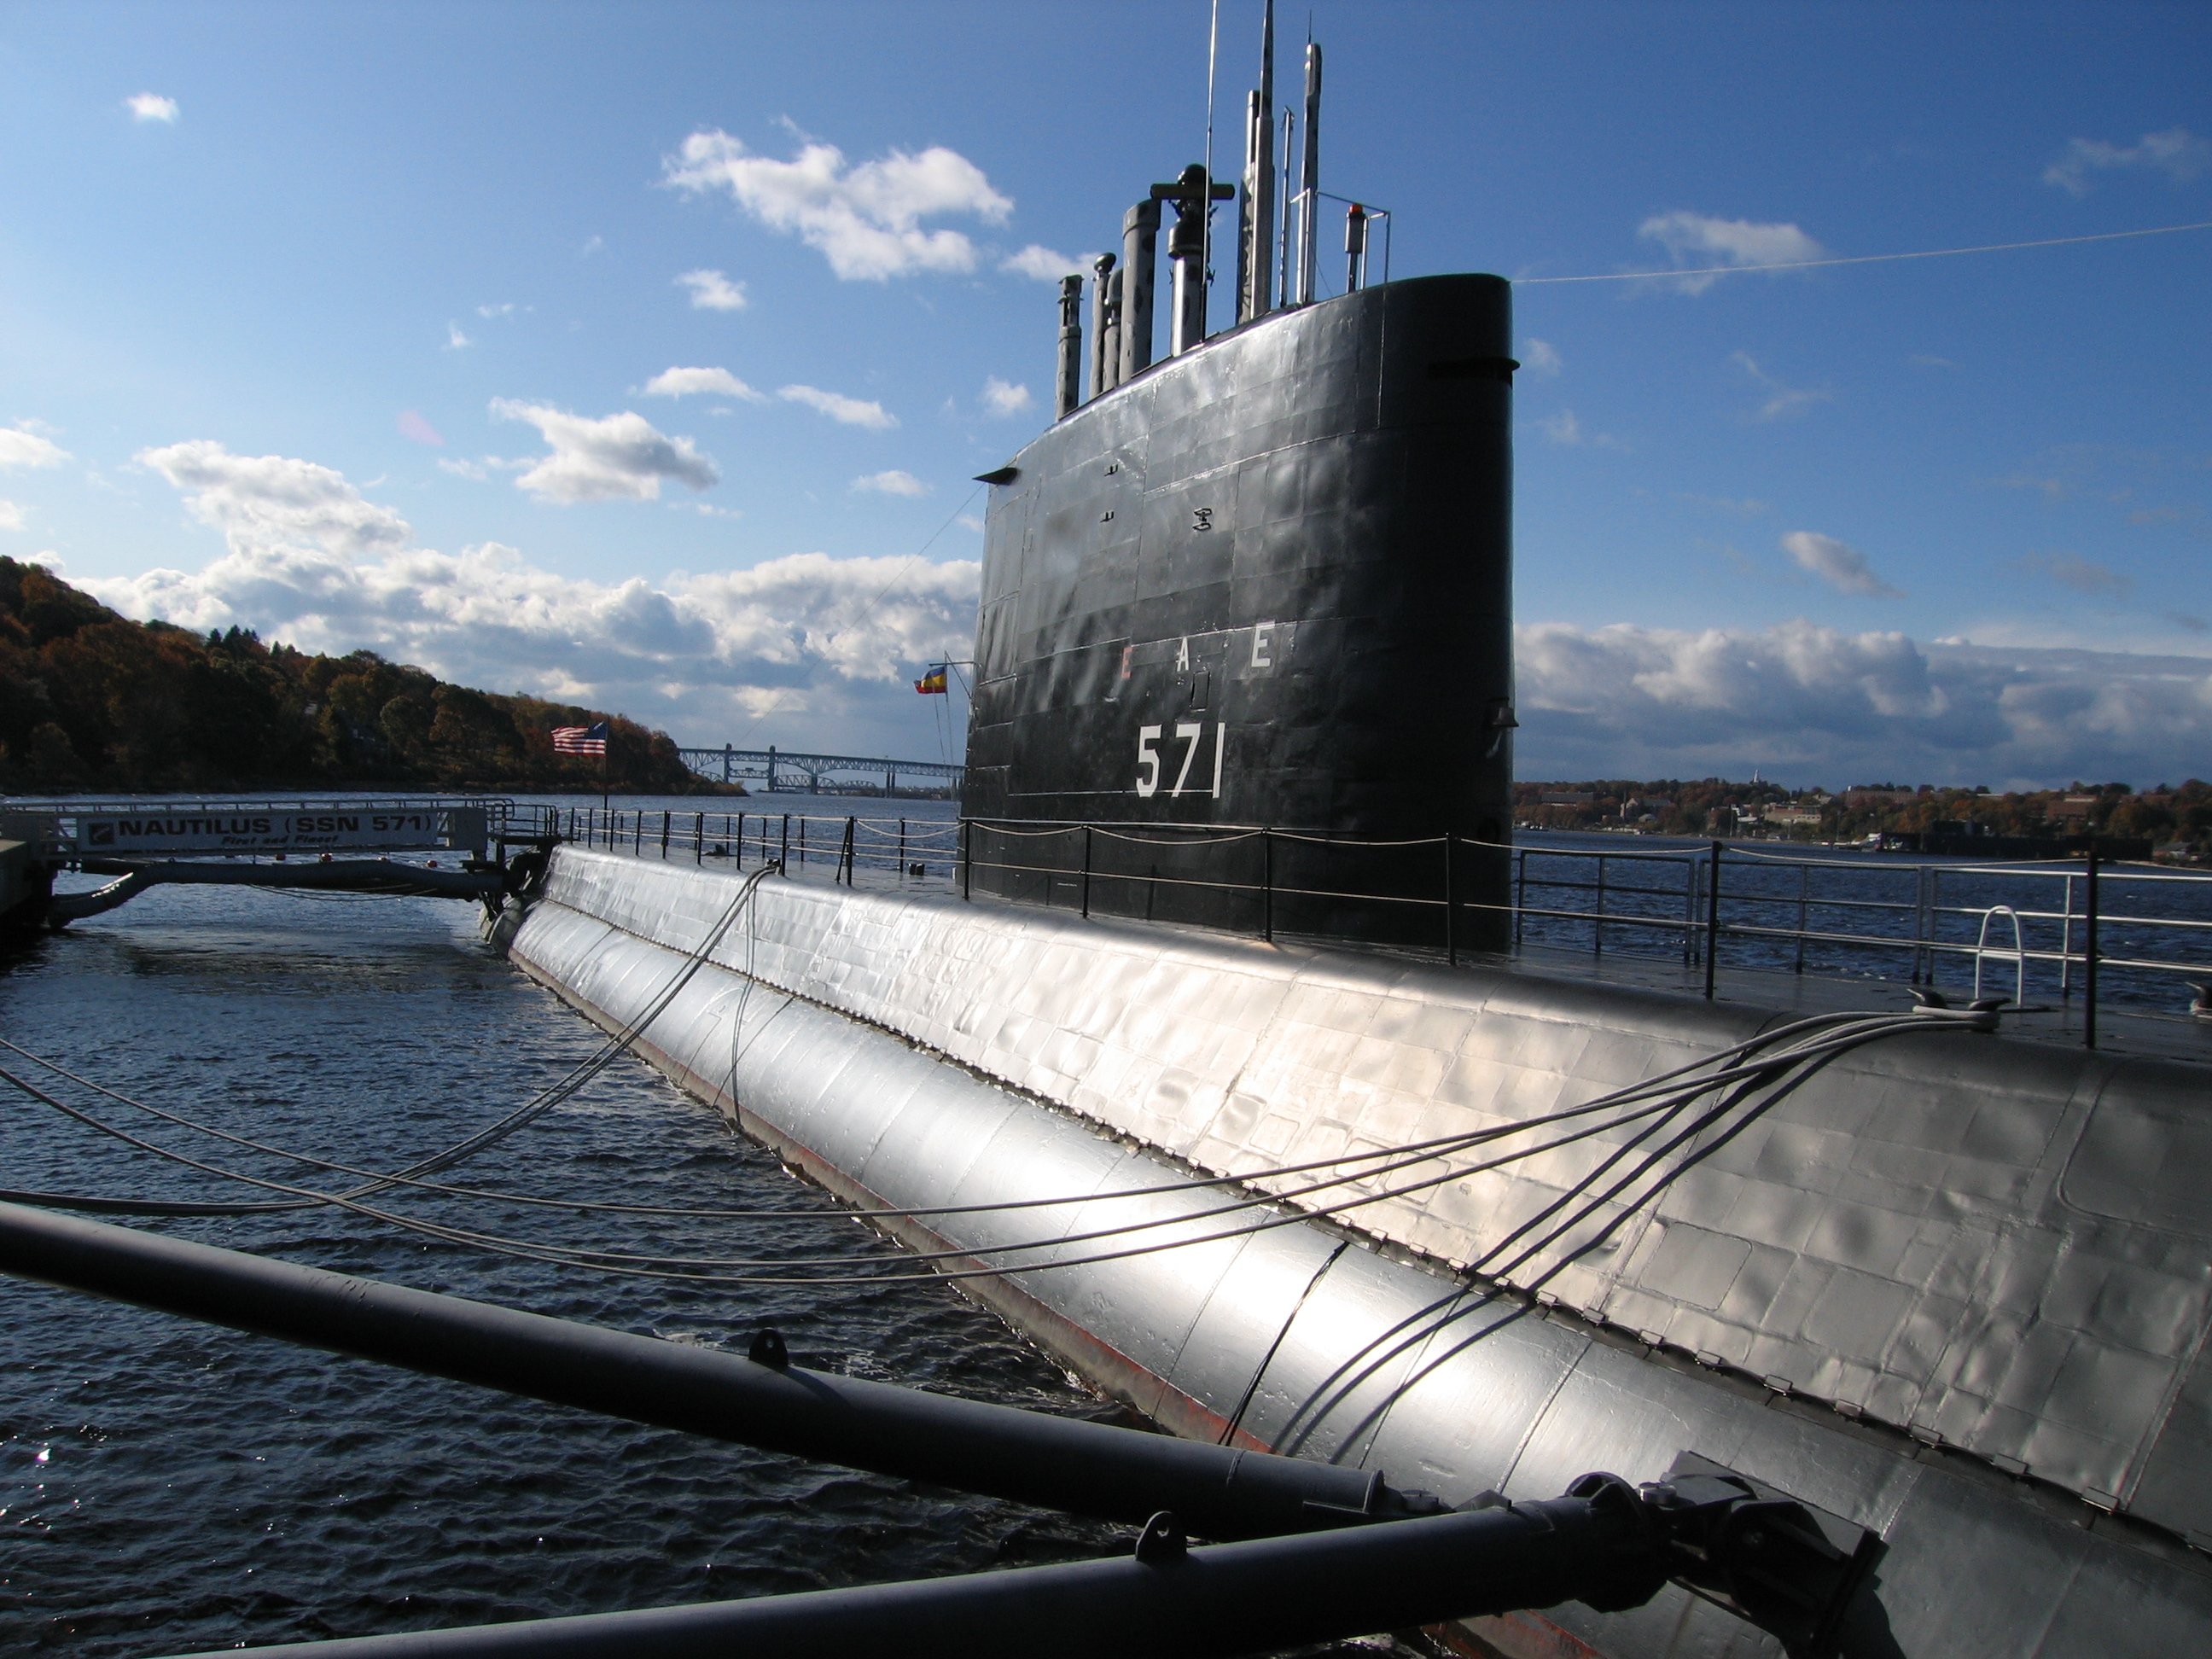 USS Nautilus (SSN-571) permanently docked at the US Submarine Force Museum and Library, Groton, Connecticut. Photo taken on October 29, 2008.